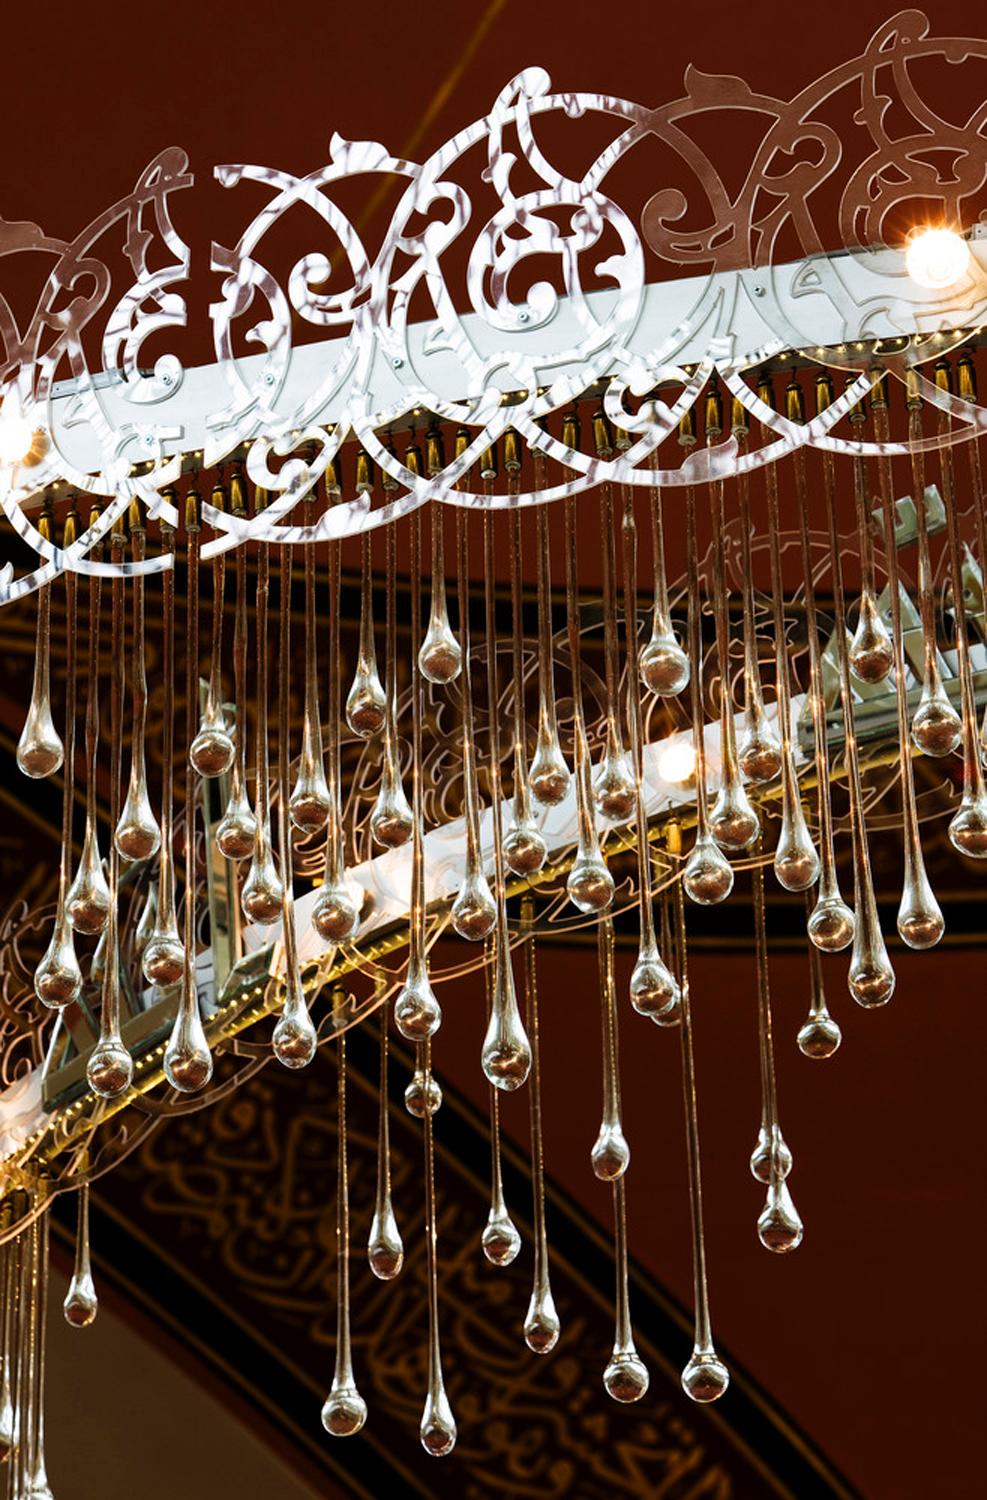 View of the chandelier and tezhip decoration in plexi and glass drops